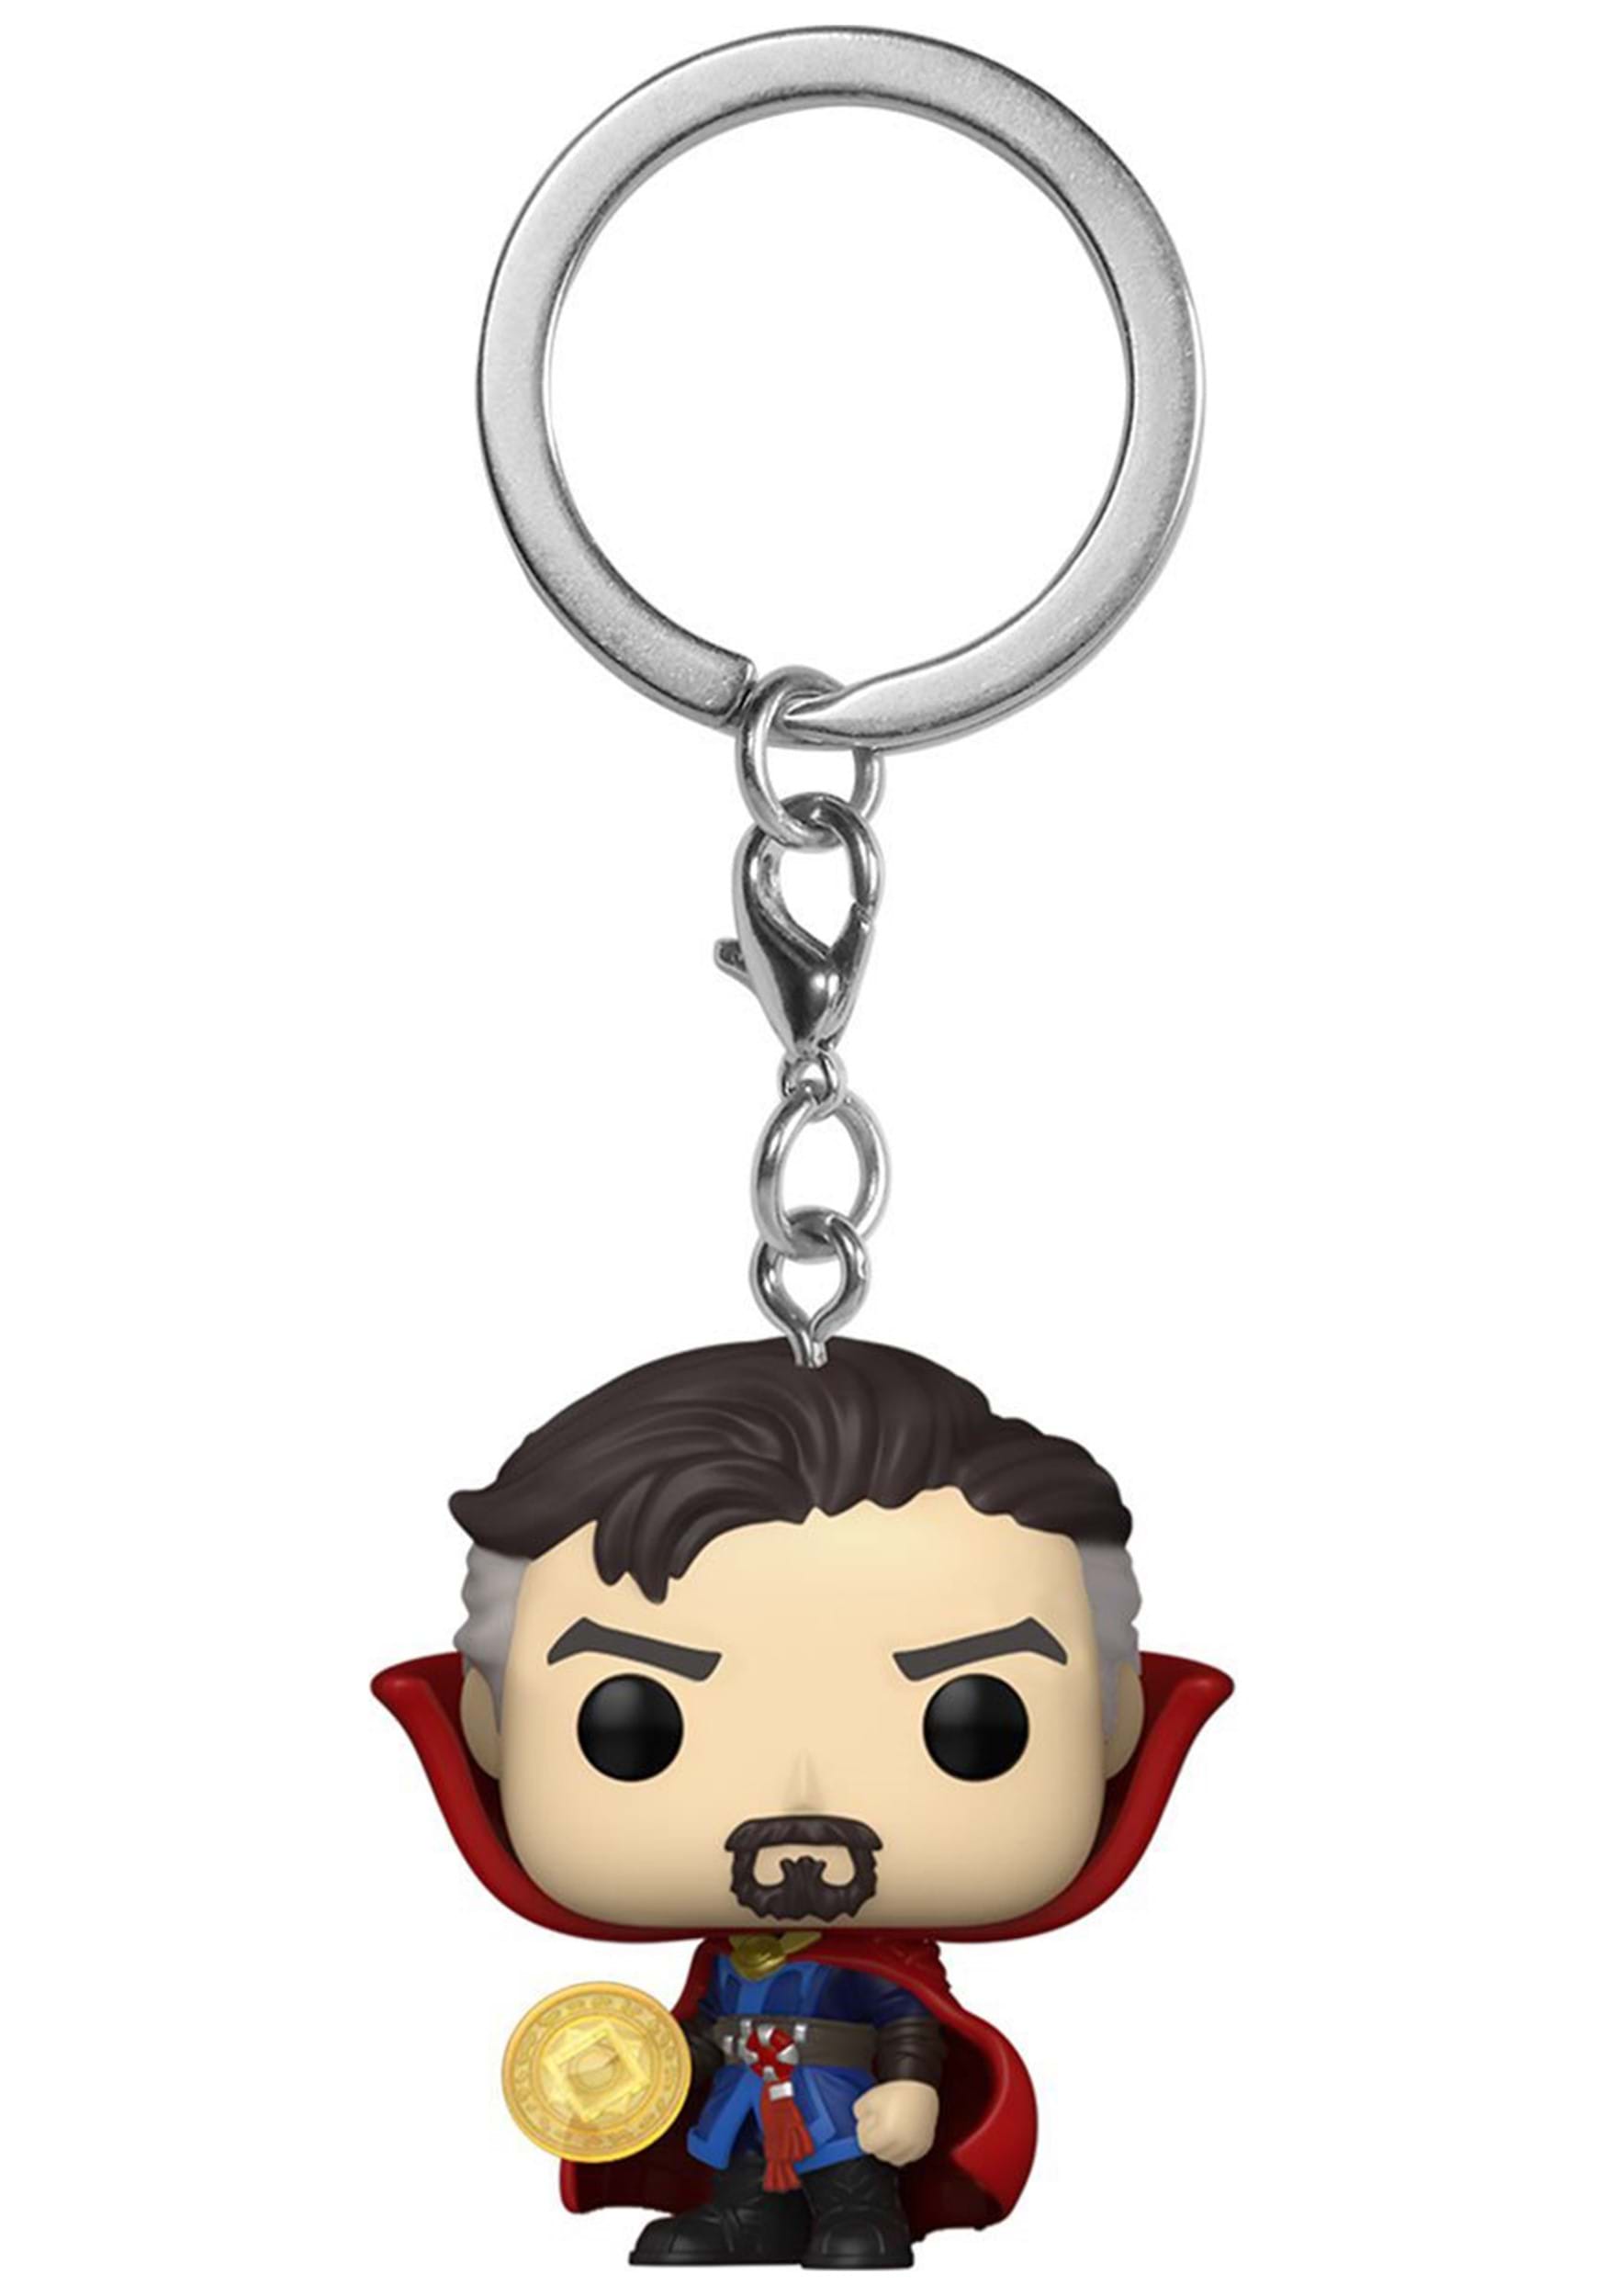 POP! Keychain: Doctor Strange in the Multiverse of Madness Keychain